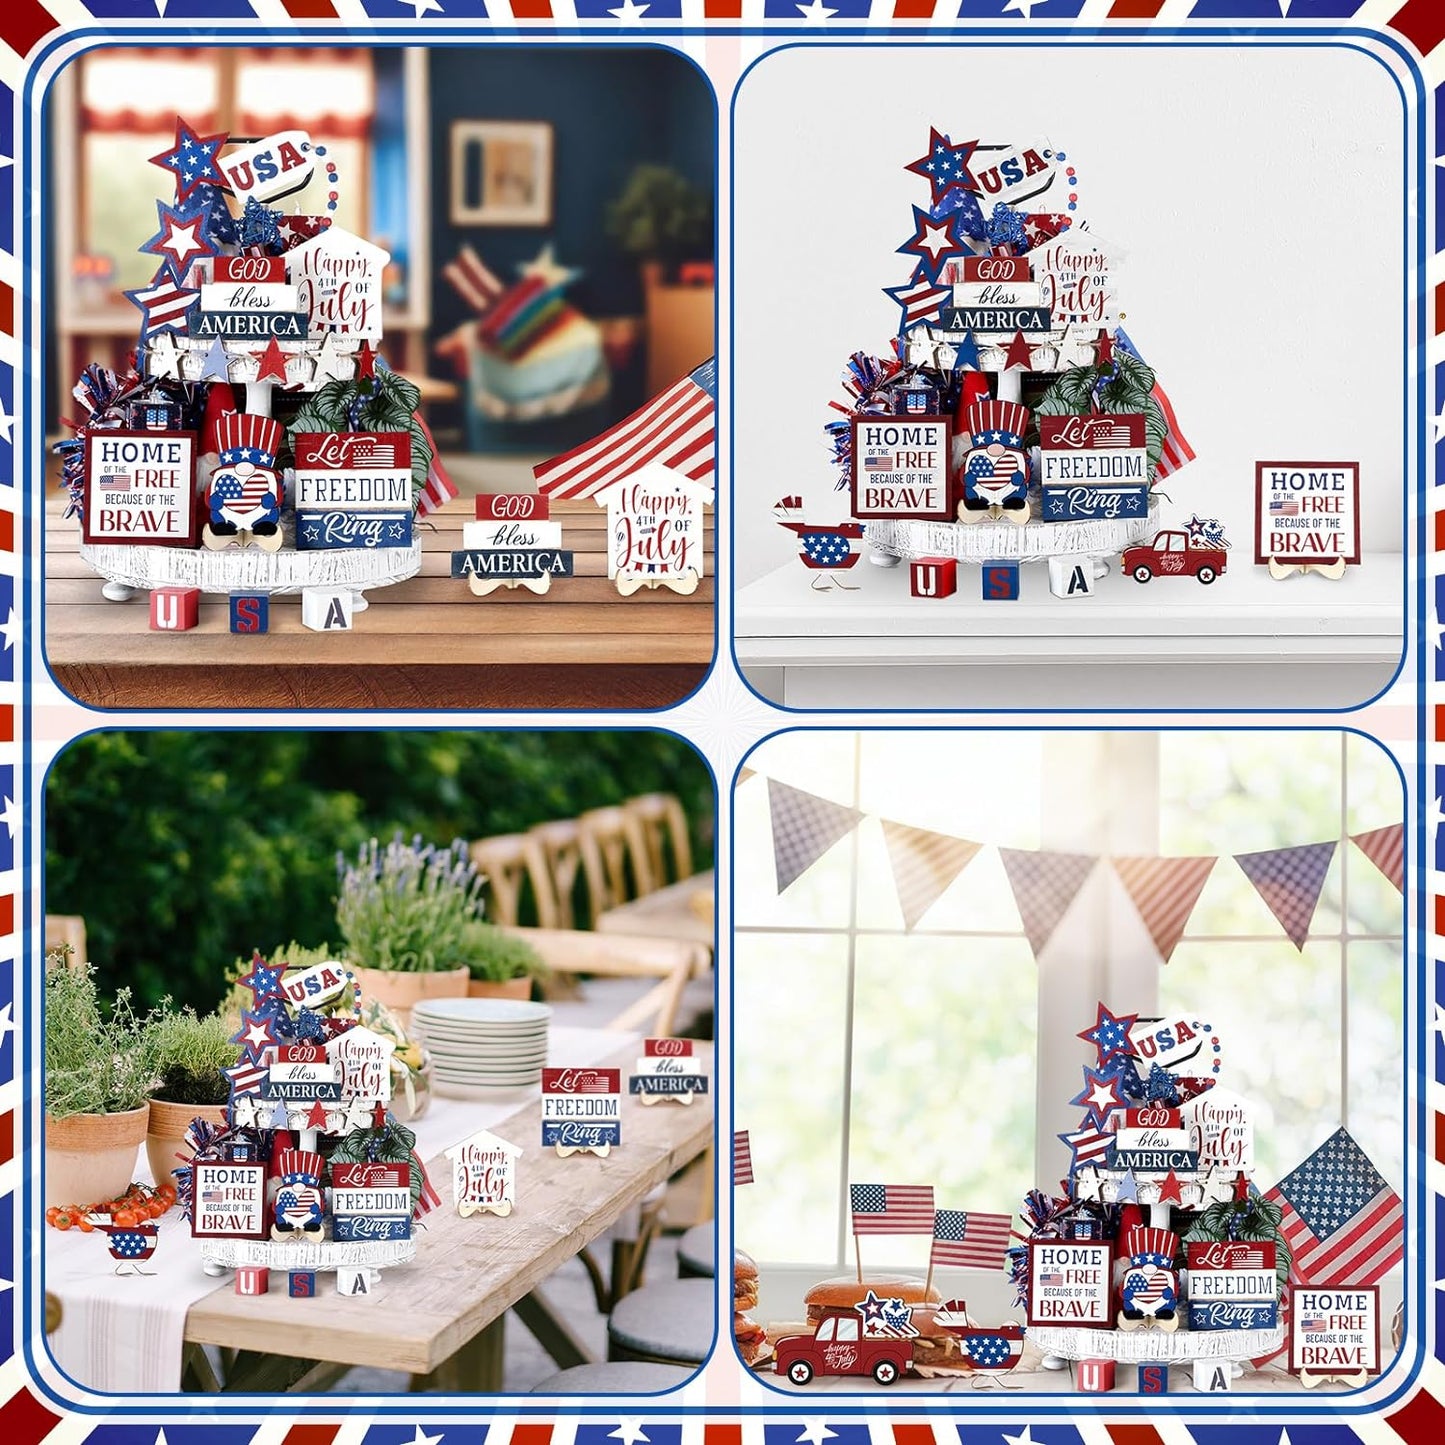 20 Pcs 4Th of July Tiered Tray Decor Set Patriotic Decorations Memorial Day Red White Blue Wooden Sign Rustic Farmhouse Table Decor for Independence Day Labor Day Home Decor